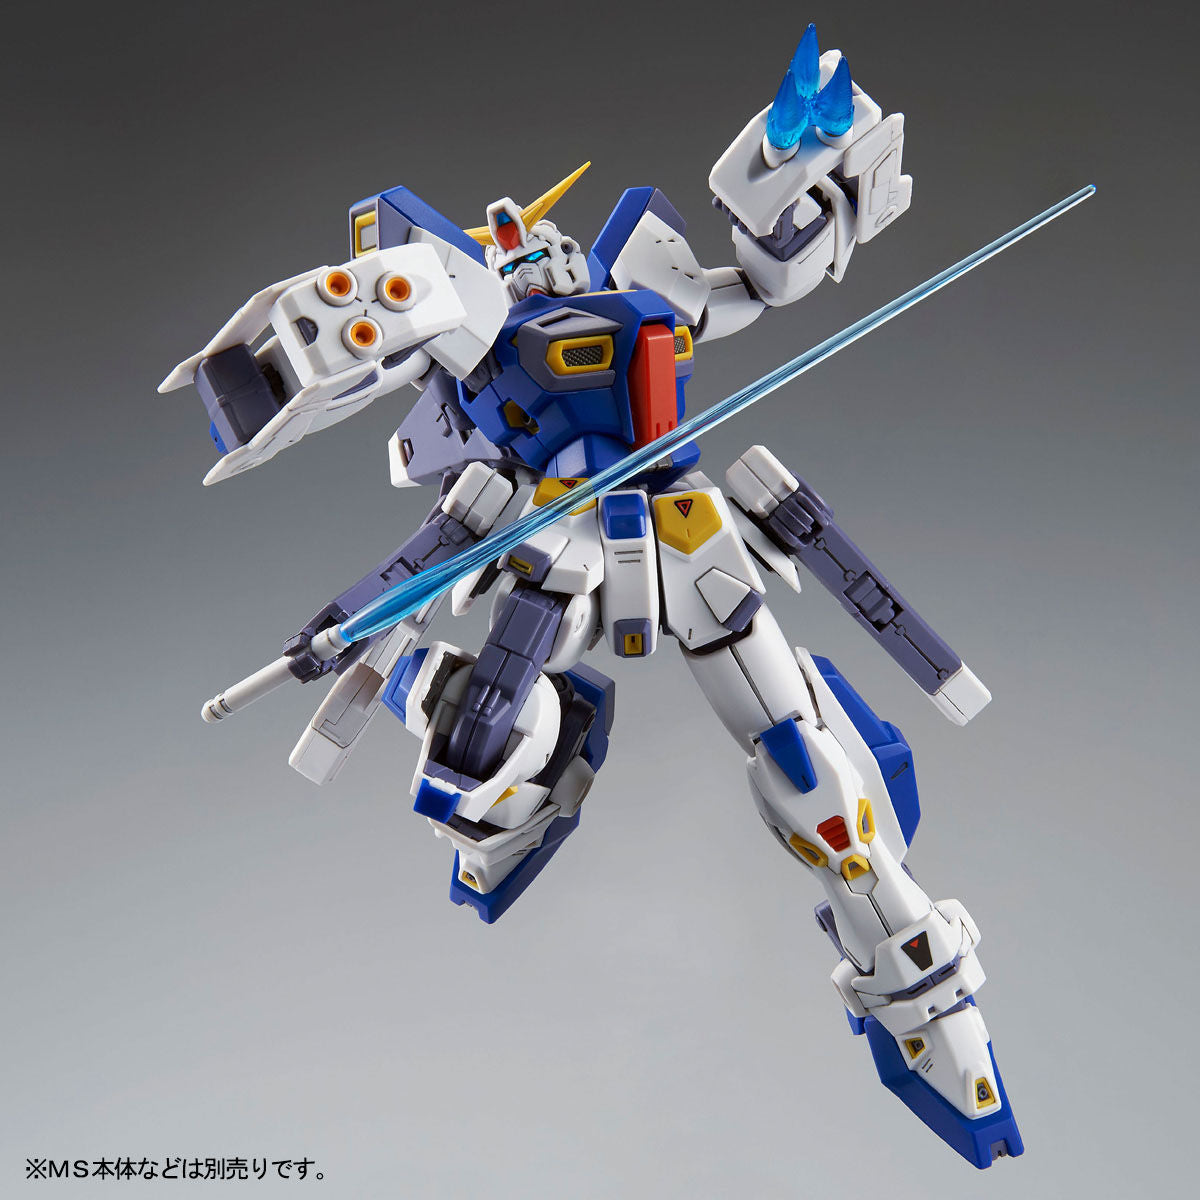 P-BANDAI: MG 1/100 GUNDAM F90 MISSION PACK F TYPE AND M TYPE EQUIPMENT SET *PARTS ONLY*